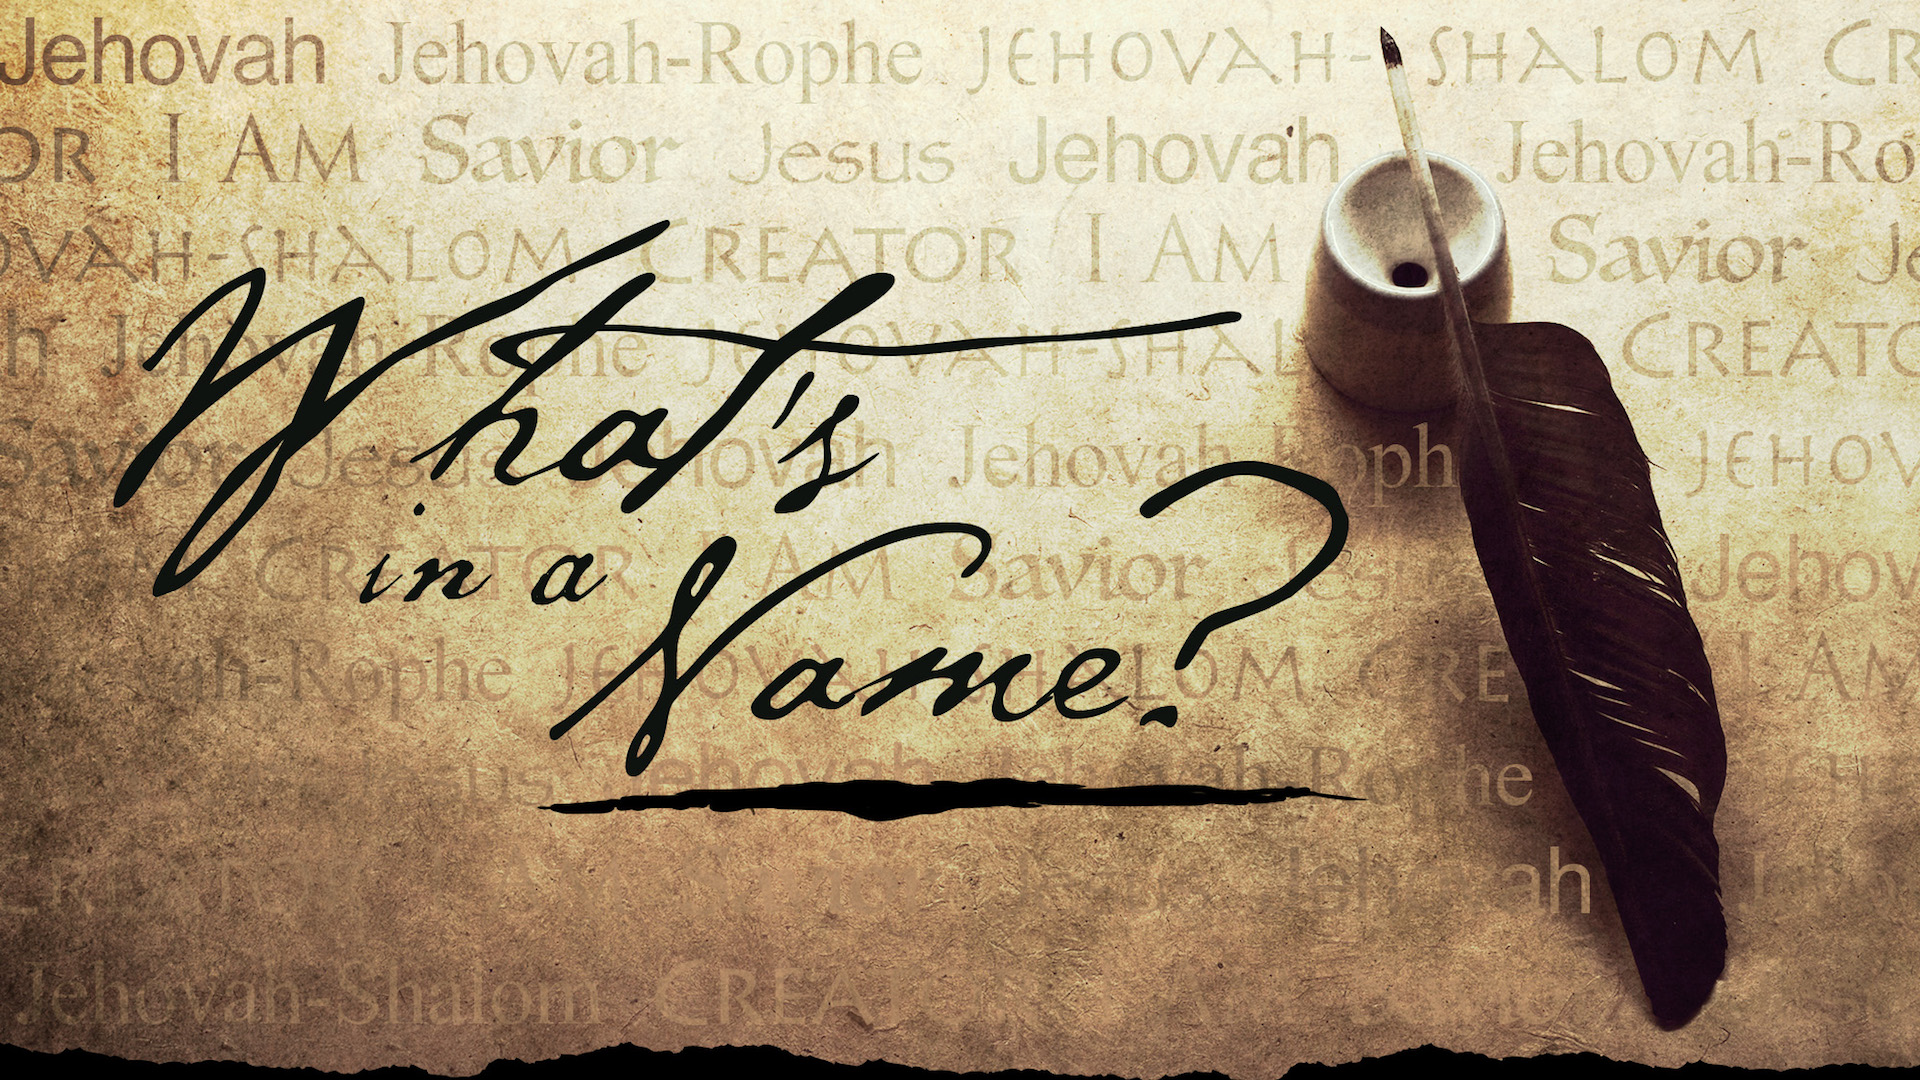 03-12-17 | What's in a Name? | The God Who Cares | Mark Anderson